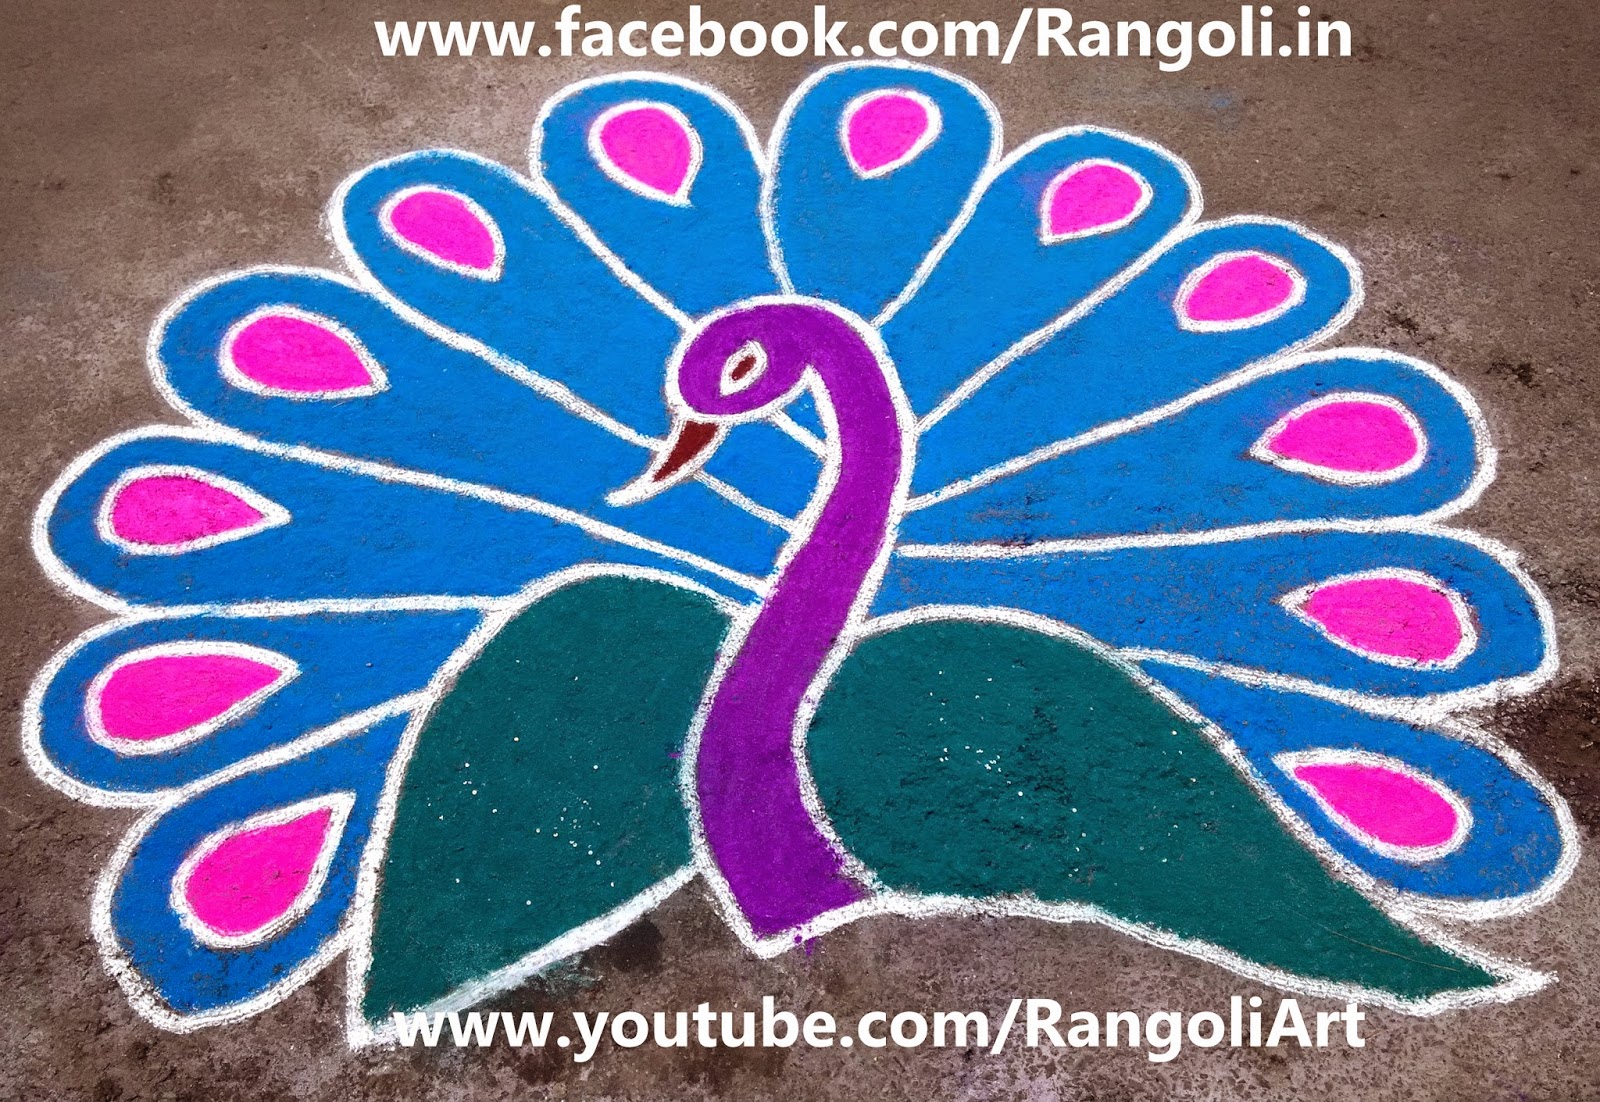 Wallpapers Download Free Awesome 2015 Rangoli Designs - Rangoli Images Download Free - HD Wallpaper 